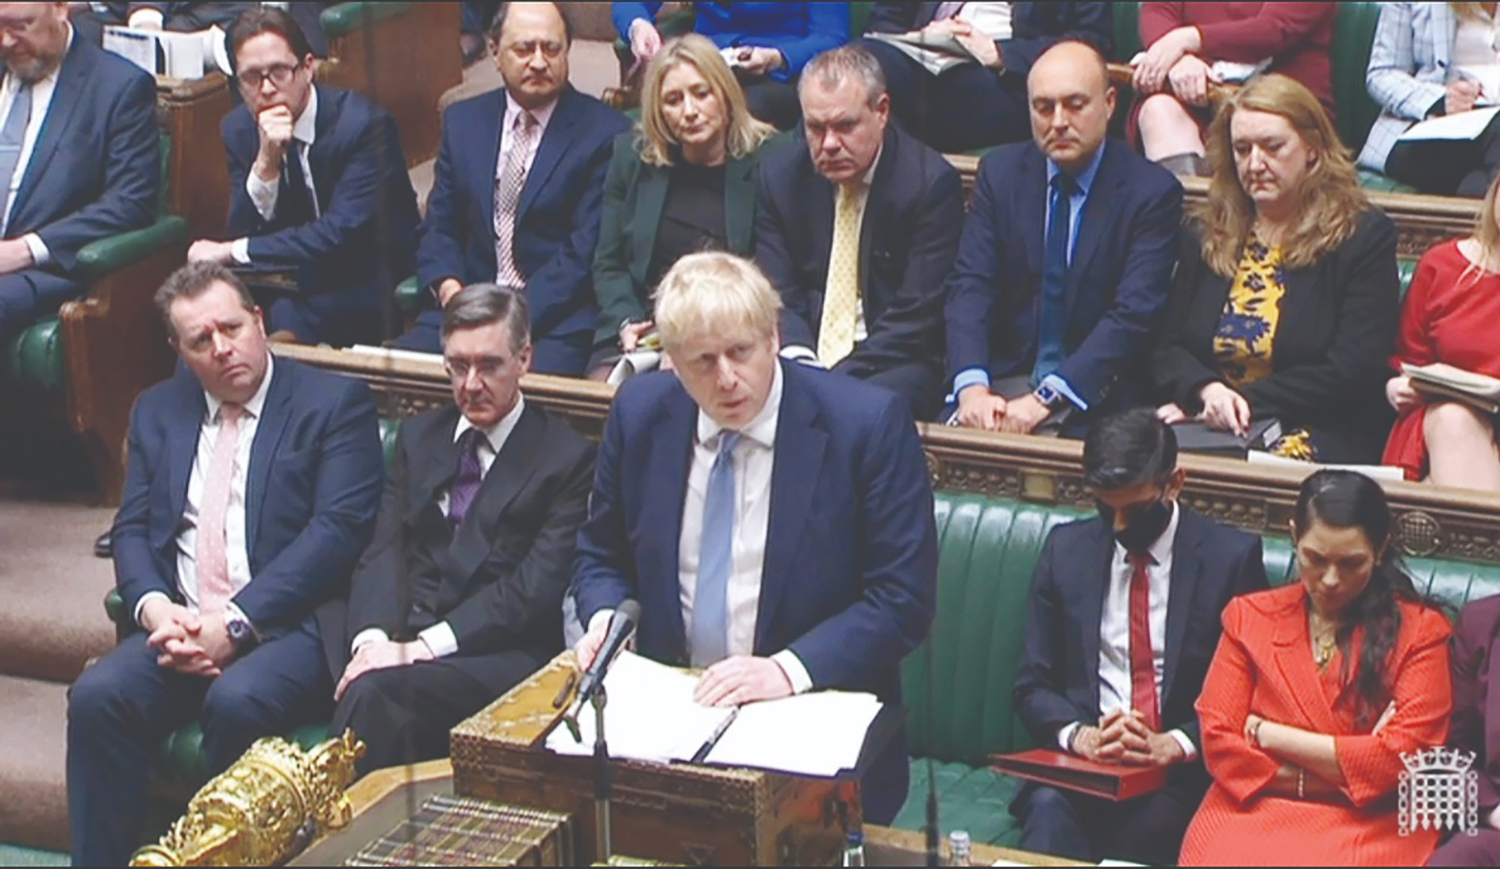 LONDON: A video grab shows British Prime Minister Boris Johnson making a statement to MPs following the release of the Sue Gray report in the House of Commons yesterday. - AFP